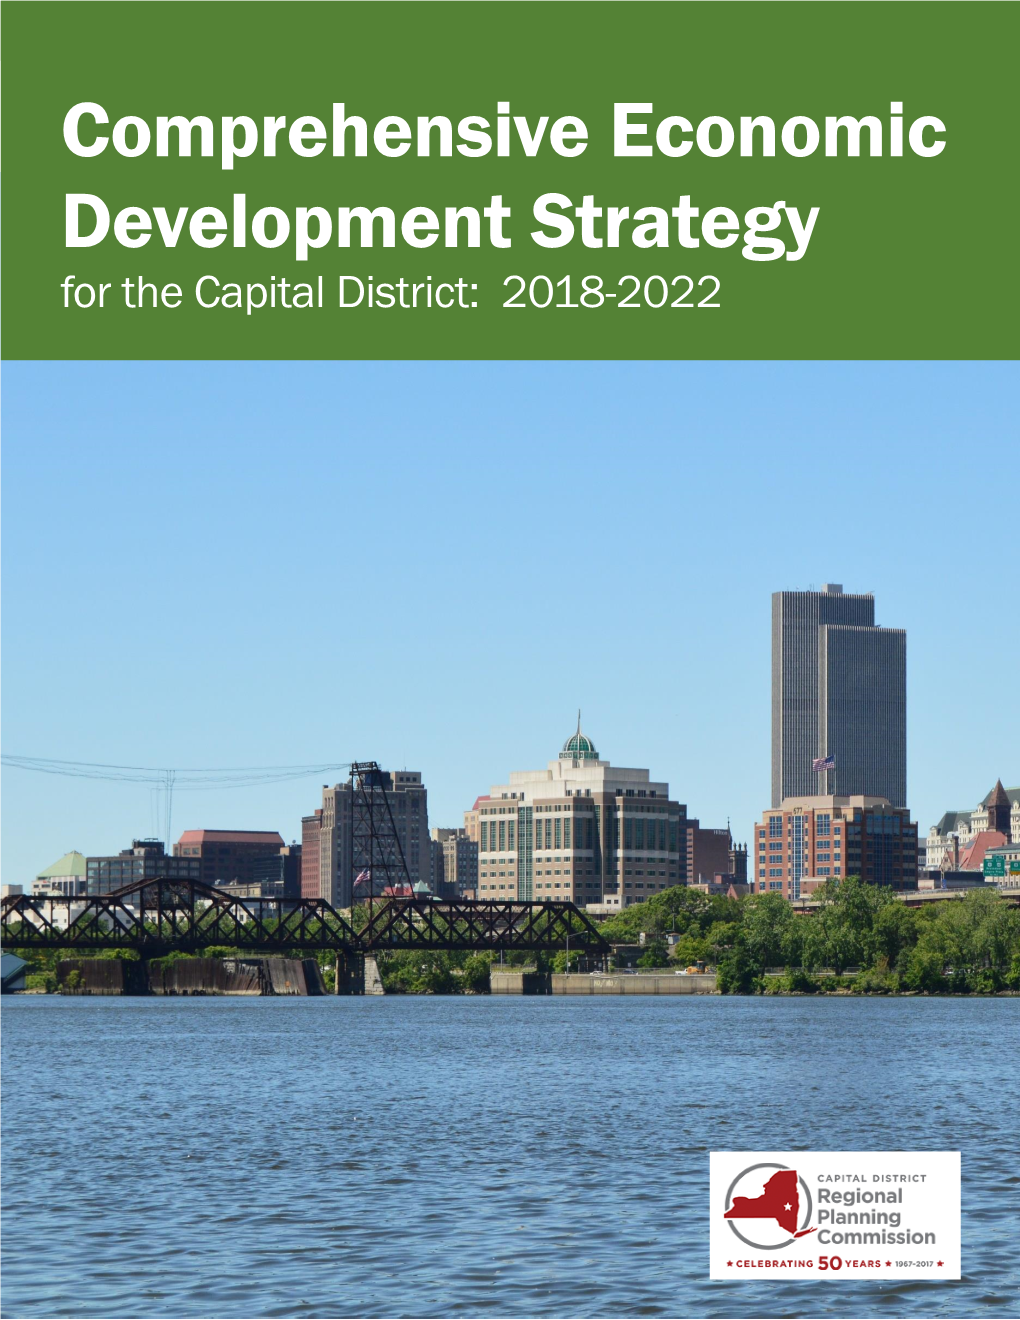 Comprehensive Economic Development Strategy for the Capital District: 2018-2022